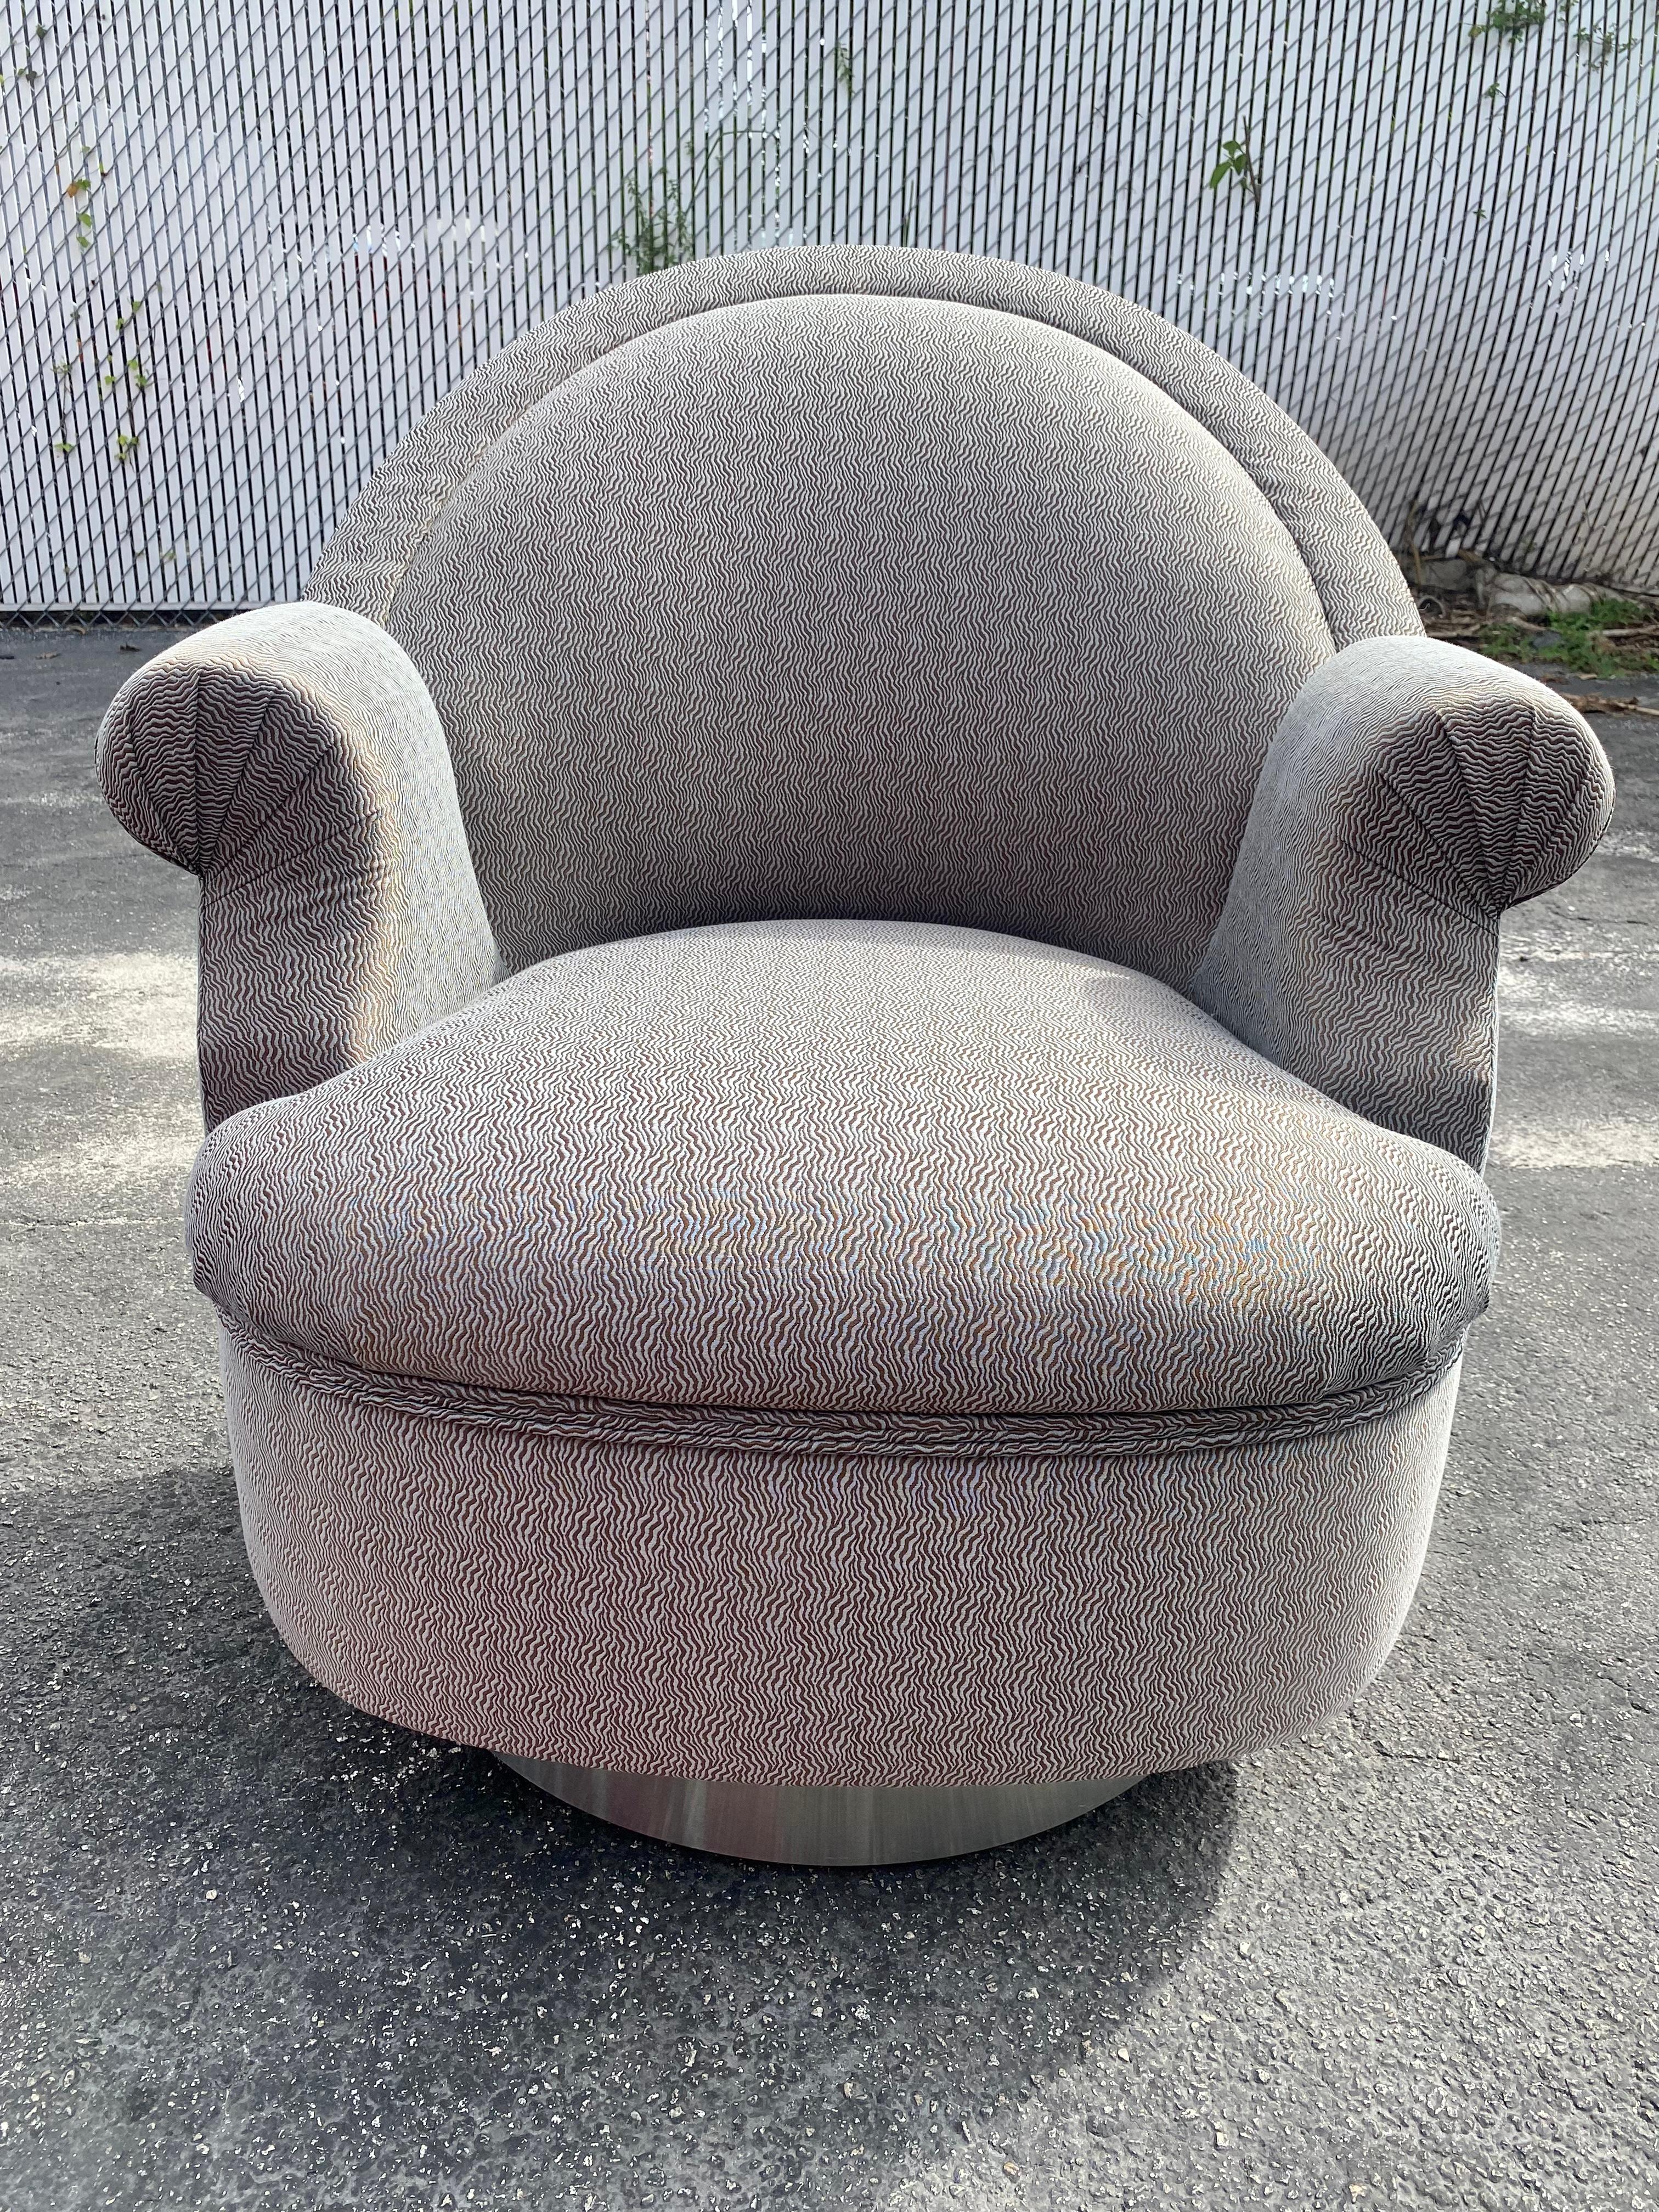 1980s Milo Baughman Rolling Swivel Chairs, Set of 2 For Sale 1